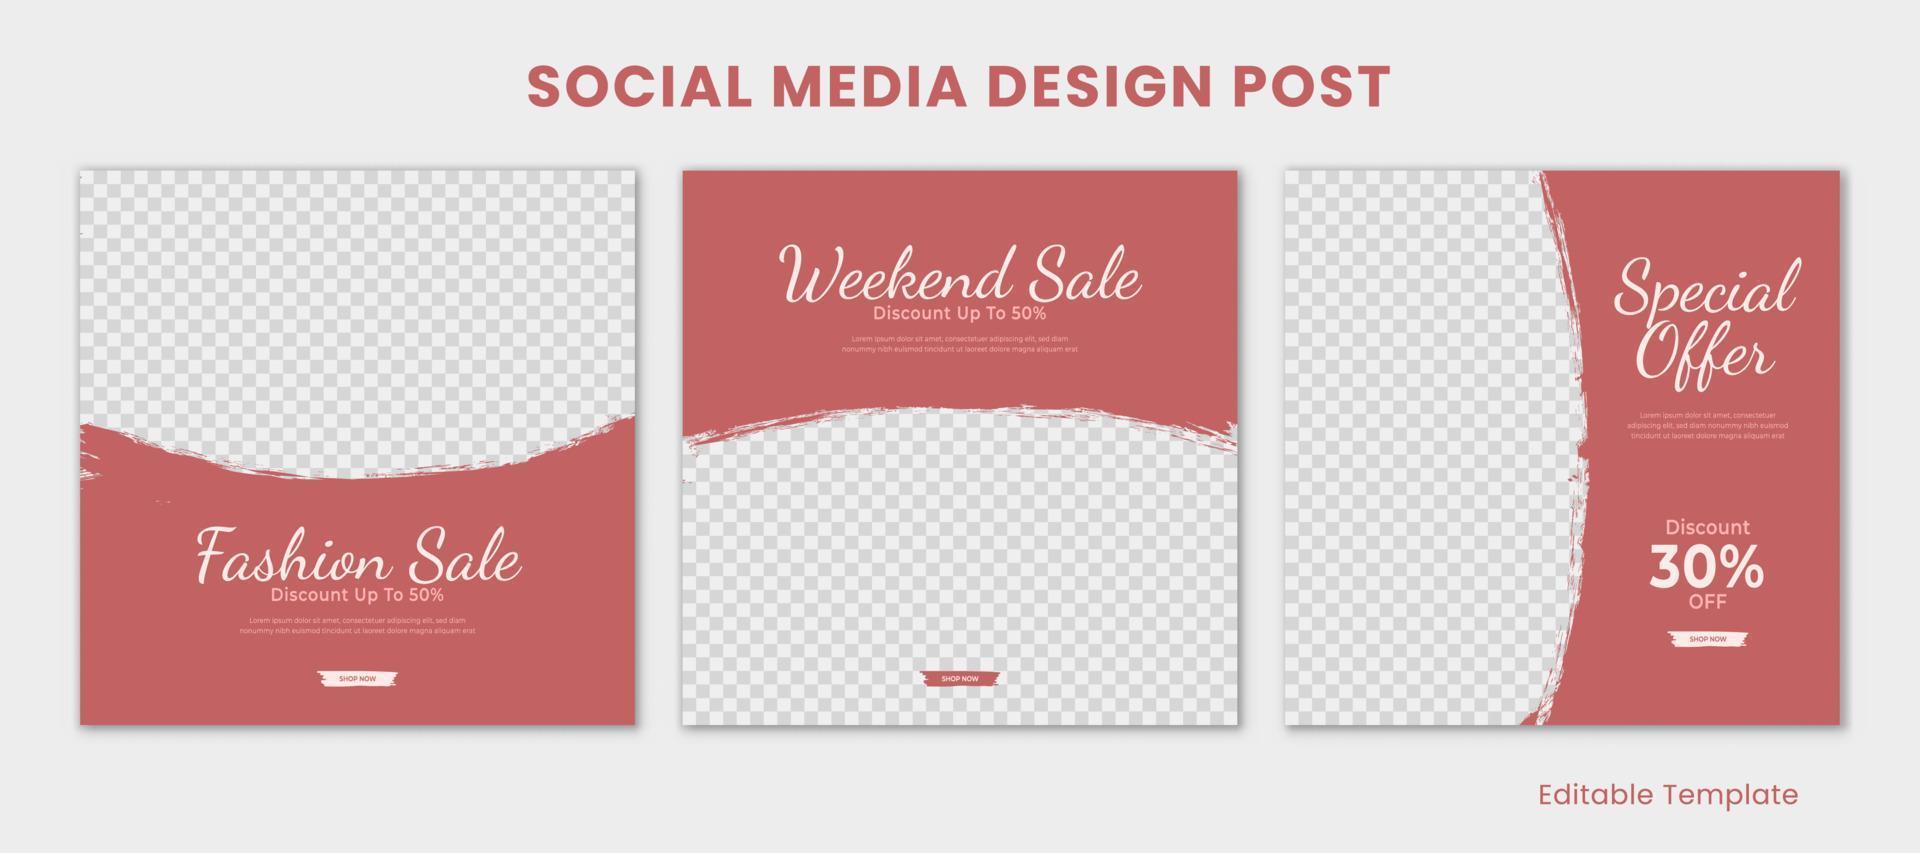 Set of Editable Template Social Media Design Post, With Pink Brush Frame Theme. Suitable For Post, Sale Banner, Ads, Promotion Product, Business, Company, Fashion, Beauty, Spa, Salon, etc vector